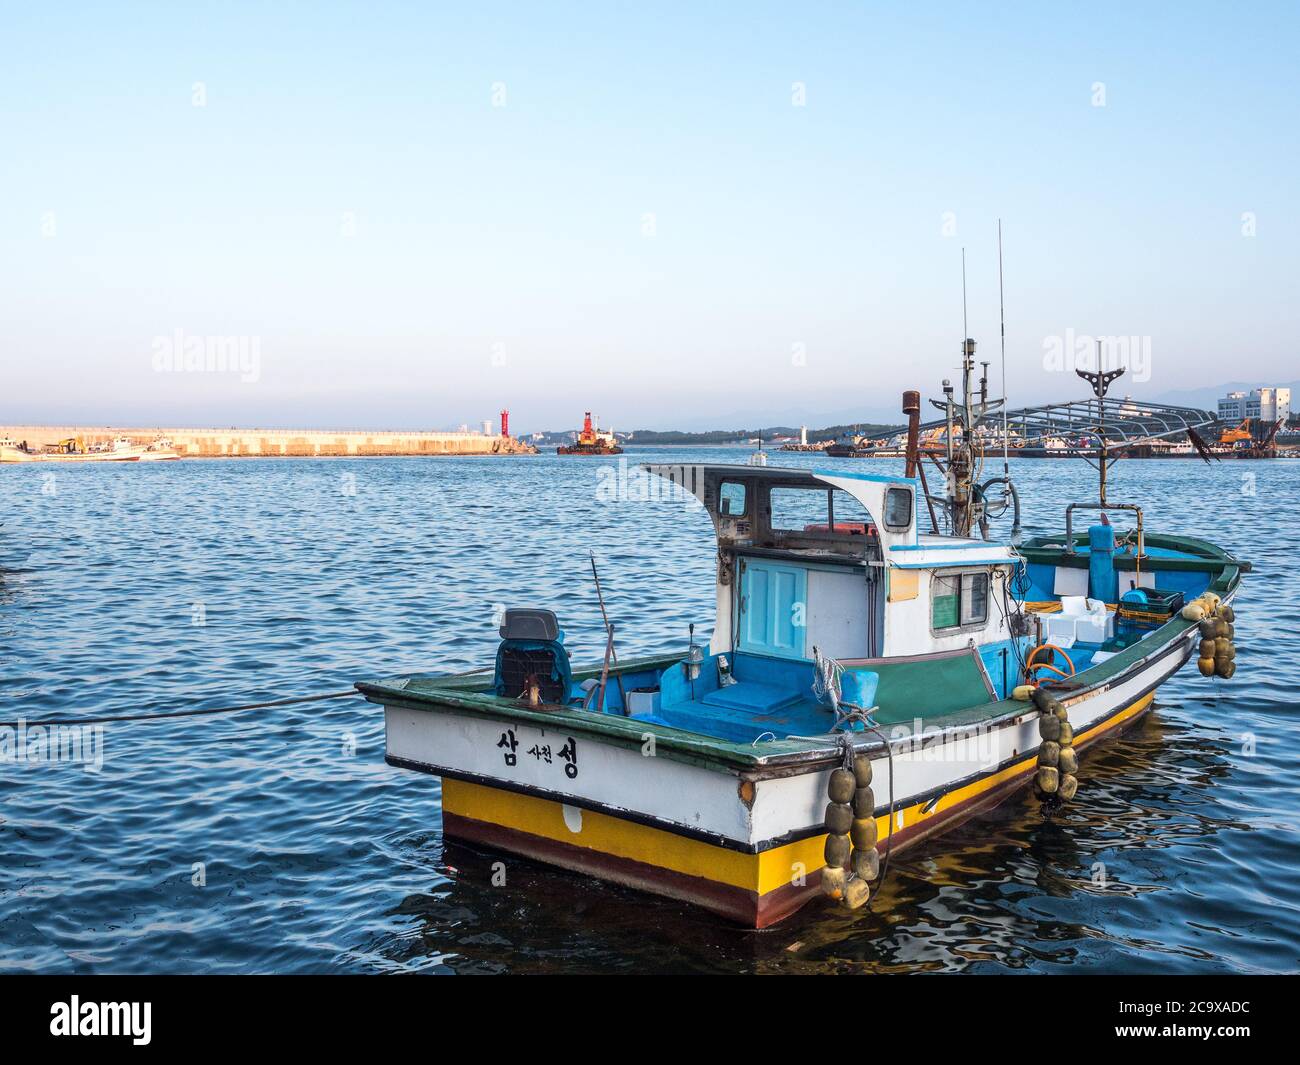 Gangneung, Gangwon province, South Korea - A fishing boat on the Sacheon Harbor in East Coast. Peaceful landscape of blue ocean and sunset sky. Stock Photo